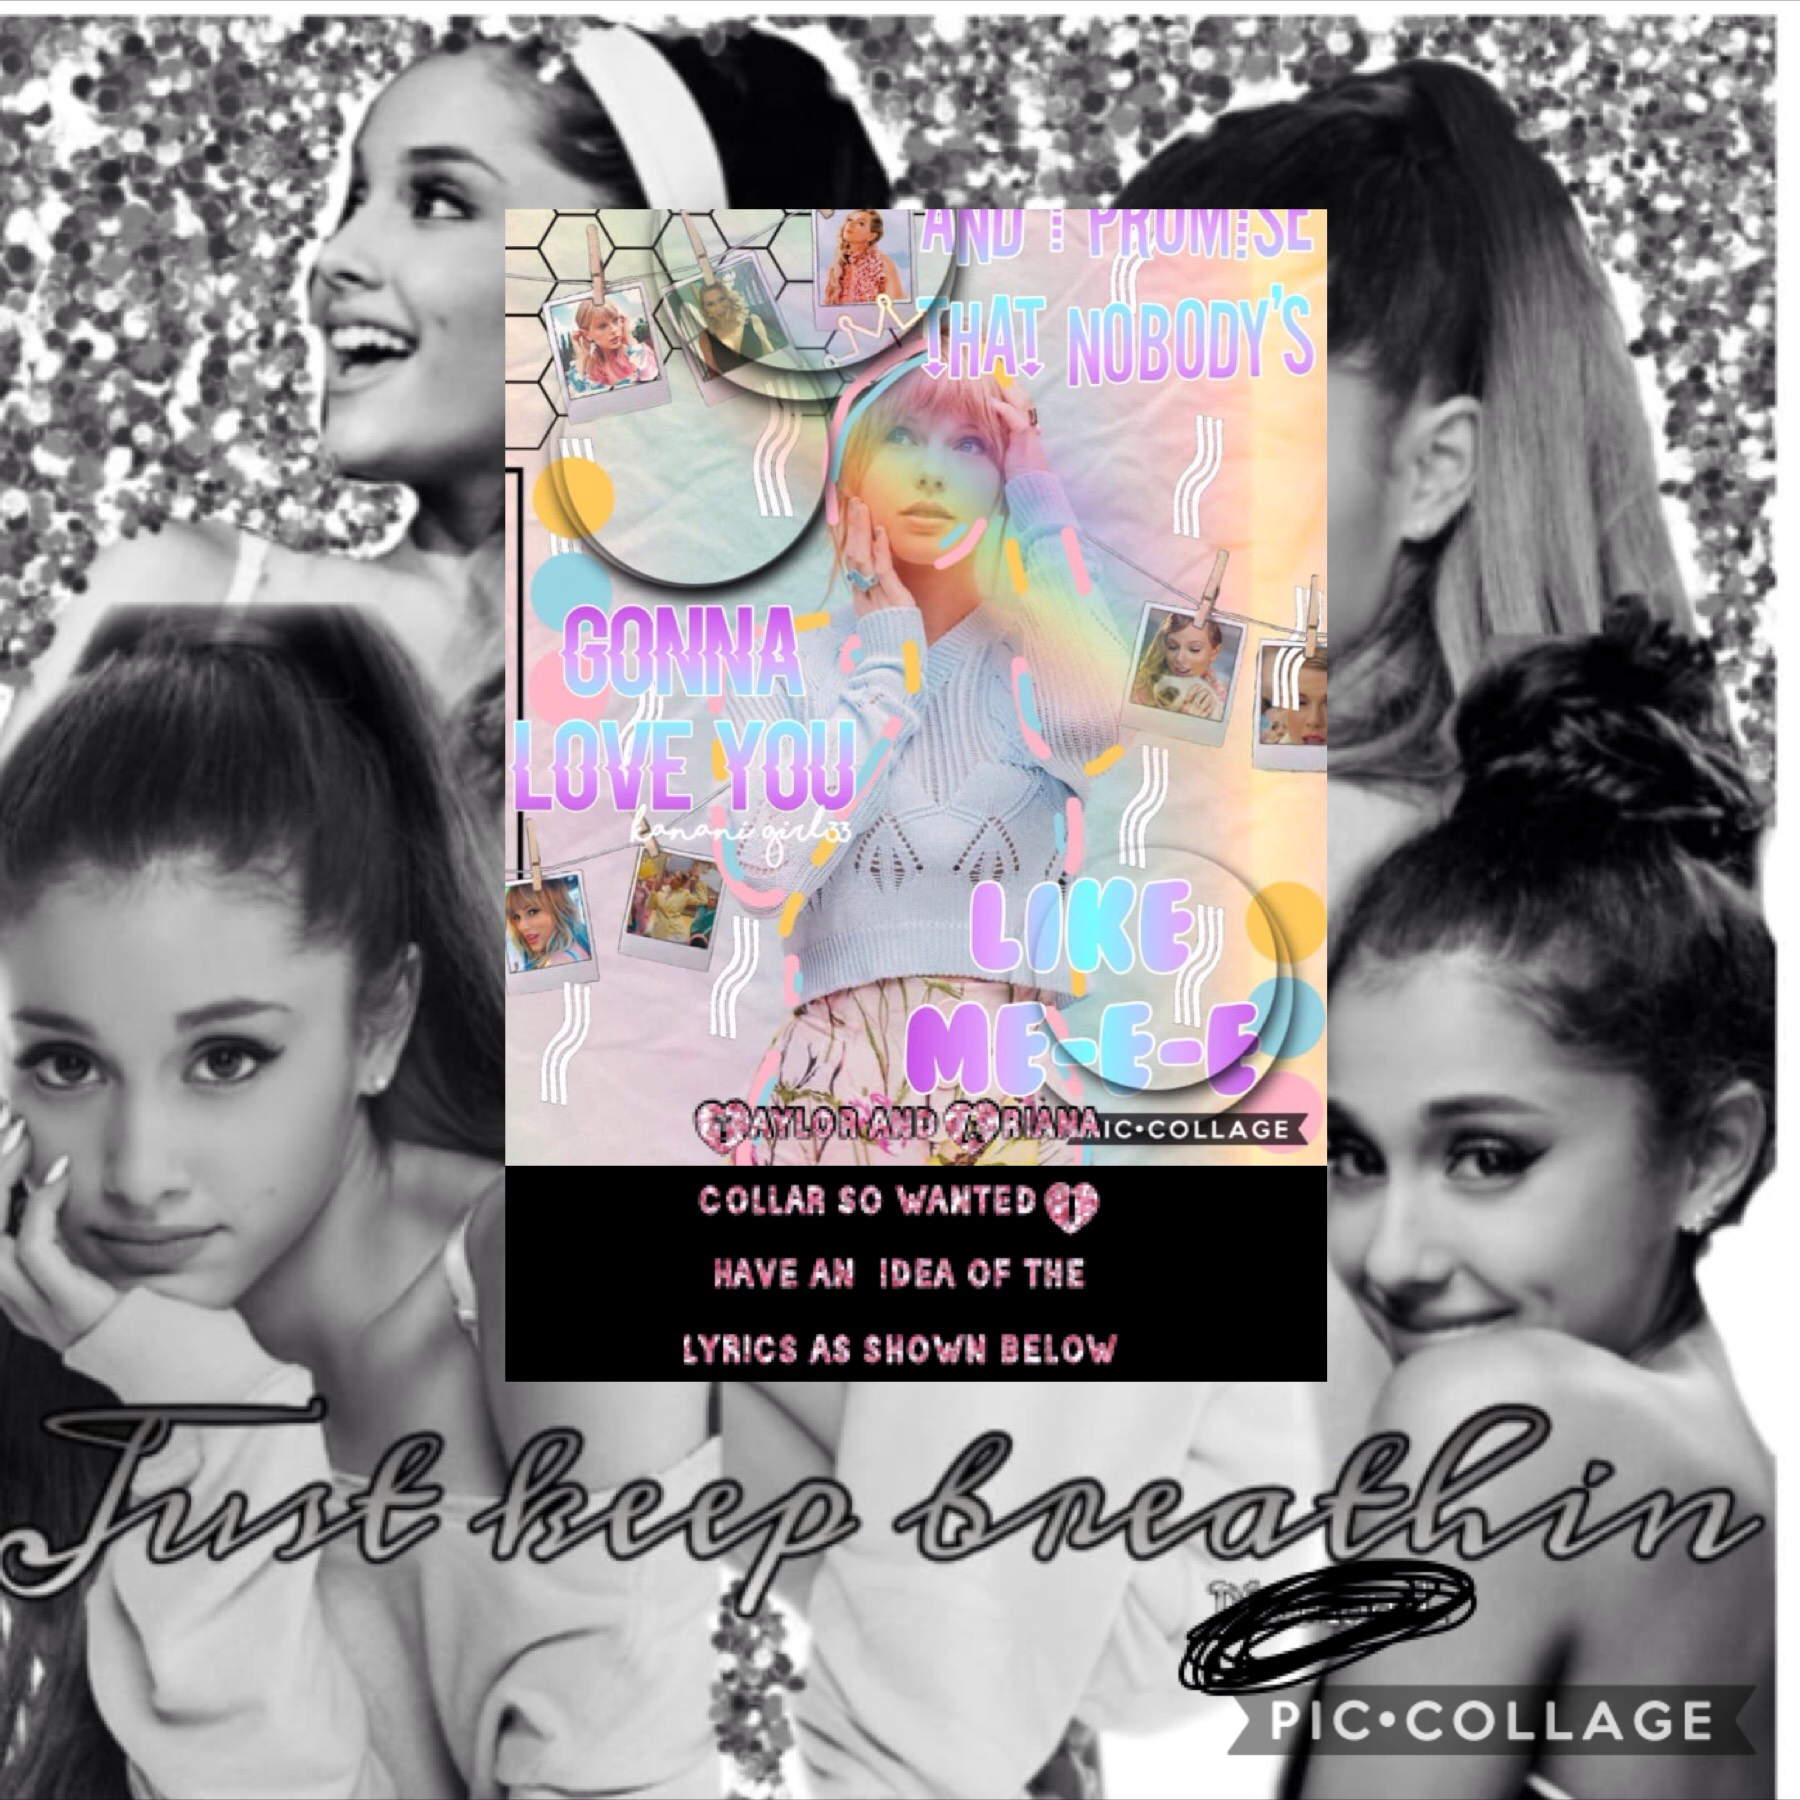 Comment below if u do or don't agree r u more a Taylor or Ariana fan? @lolZzlol